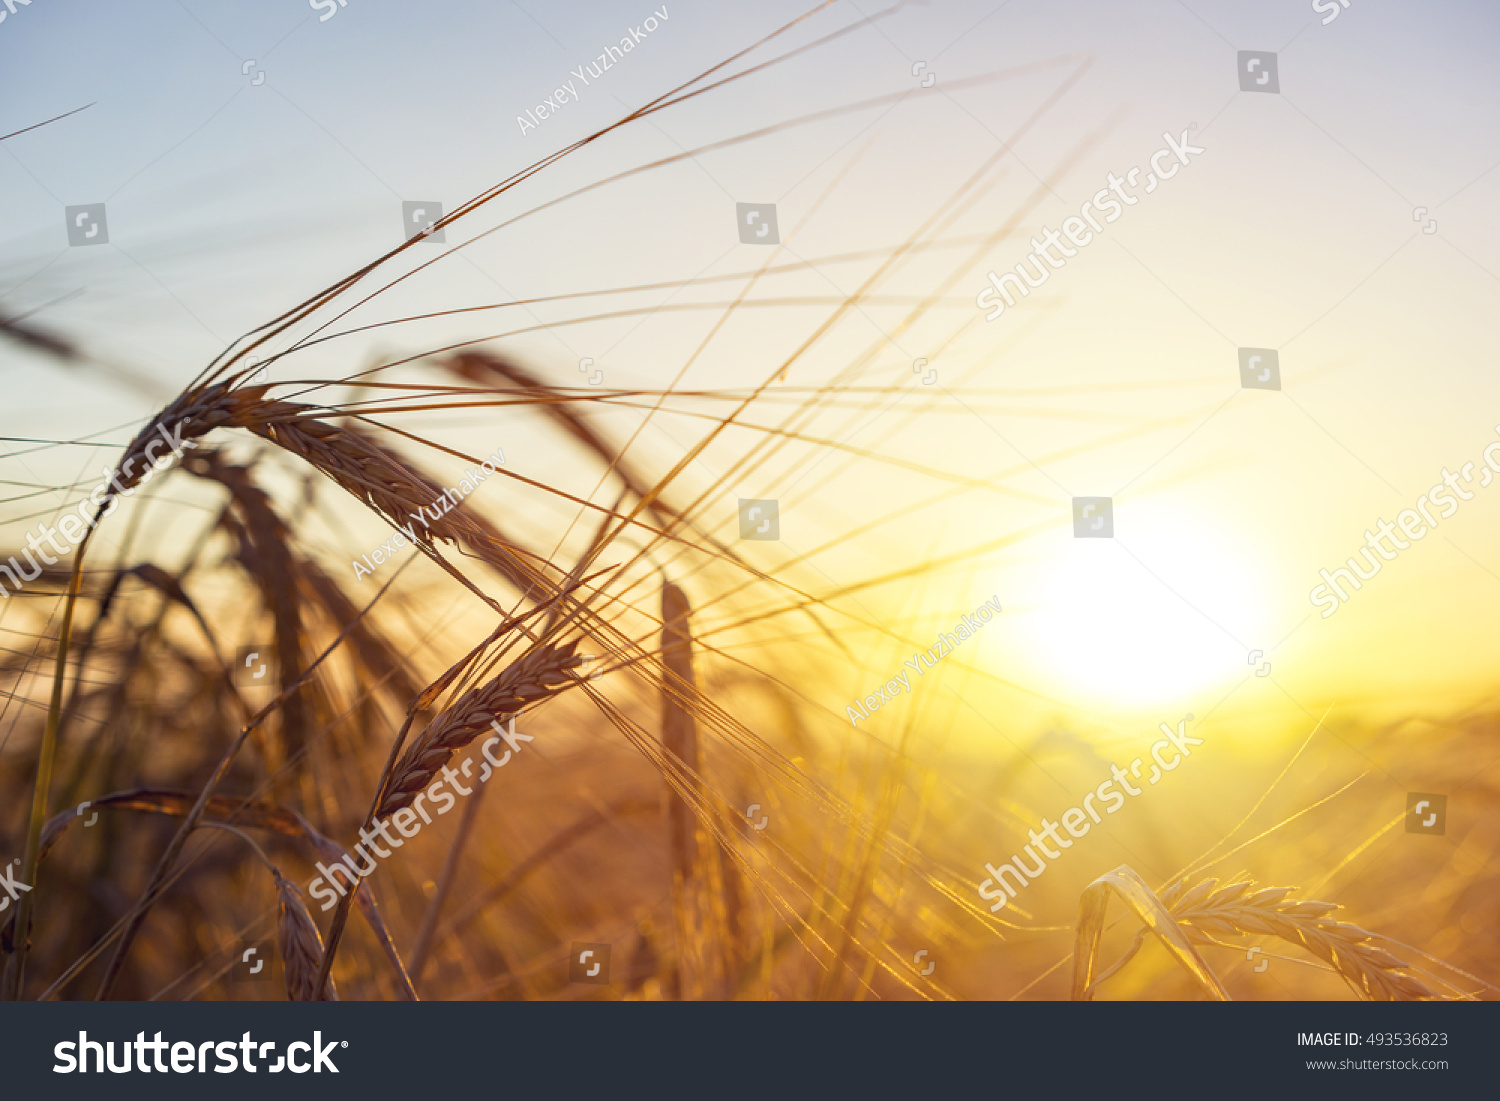 Beautiful nature sunset landscape. Ears of golden wheat close up. Rural scene under sunlight. Summer background of ripening ears of agriculture landscape. Natur harvest. Wheat field natural product.  #493536823